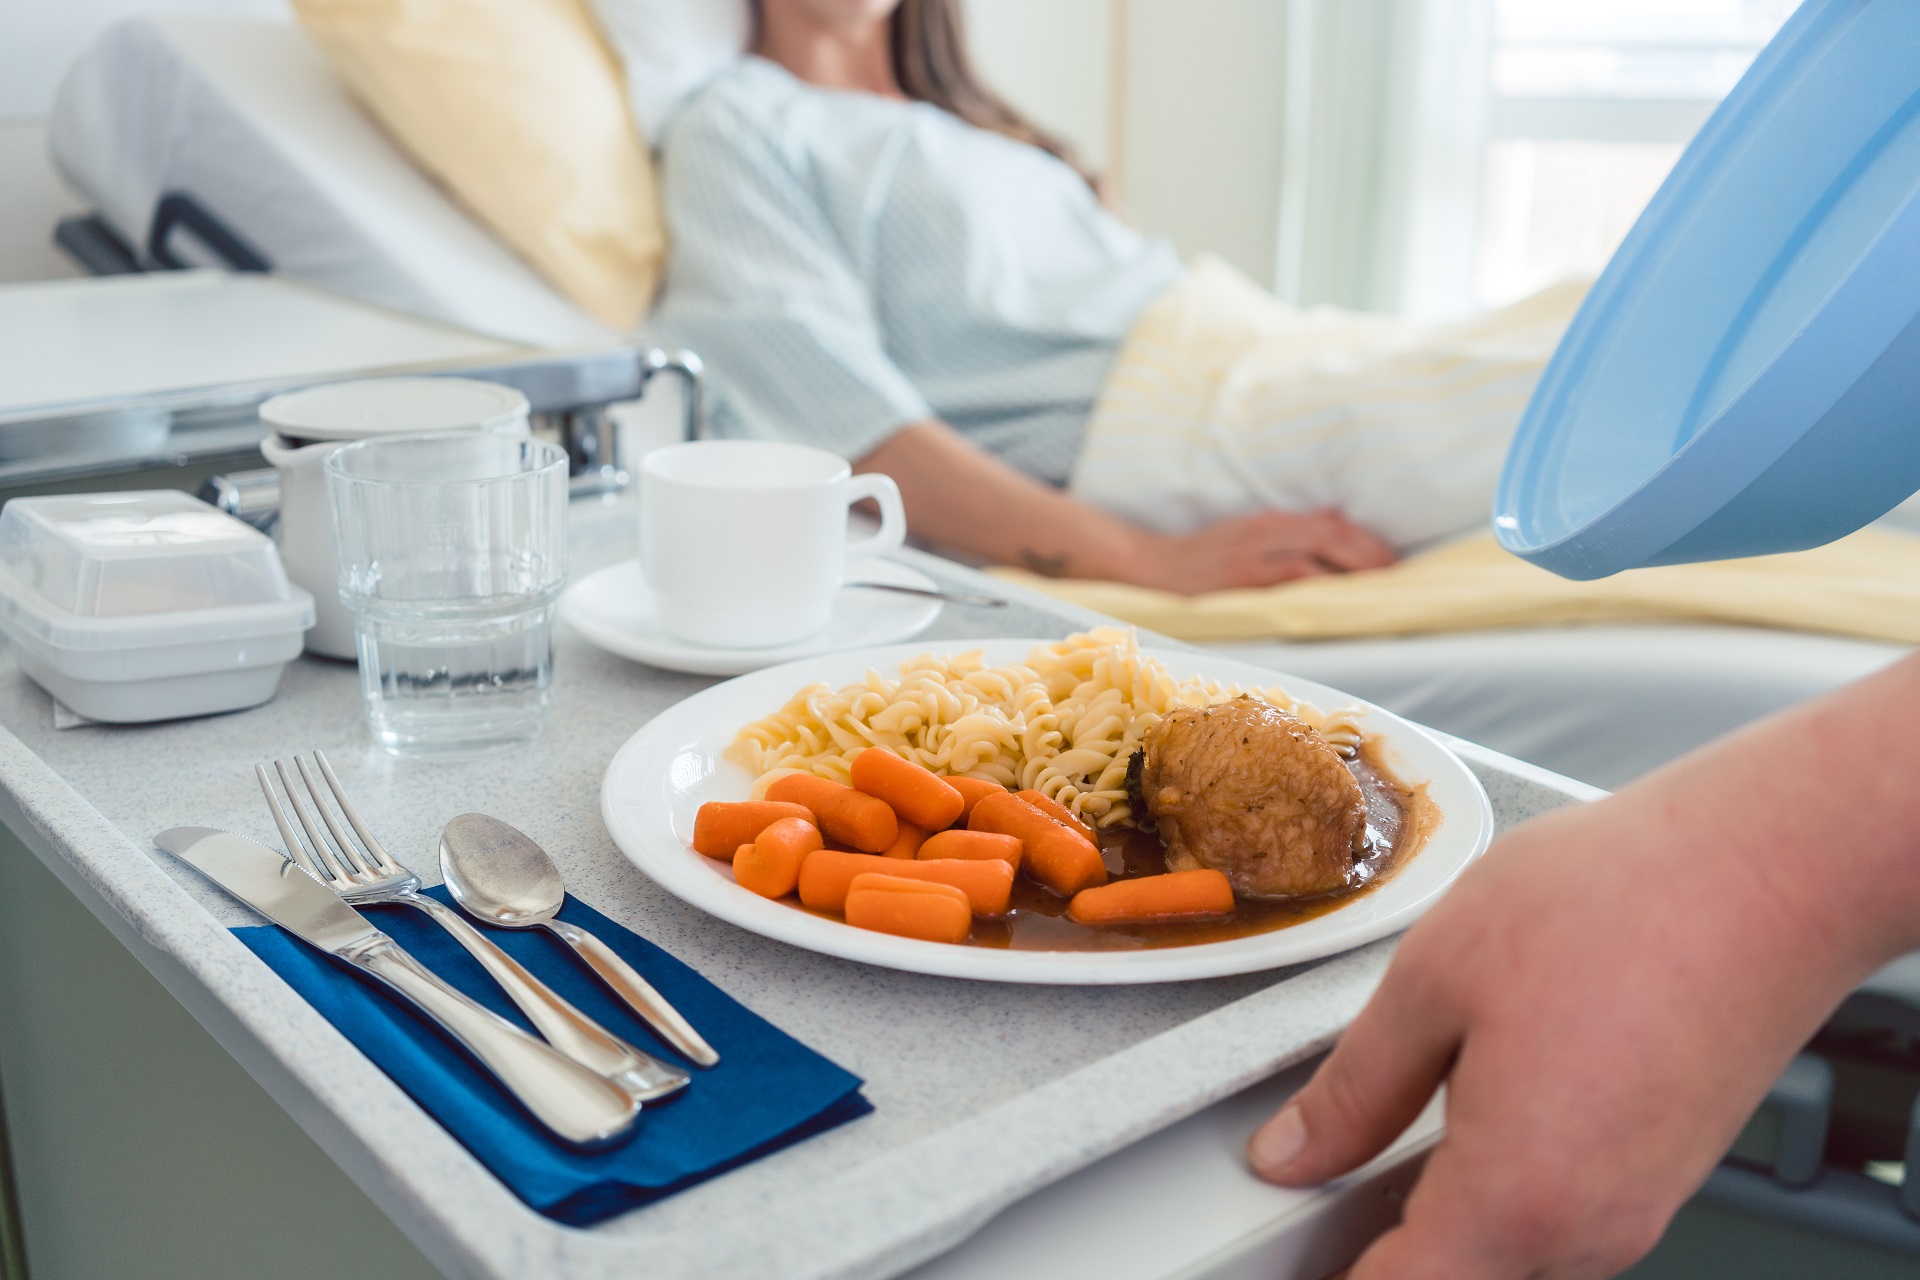 Consumers say dining was an important part of their last stay at a healthcare facility. Explore the distinct consumer types and operator challenges.